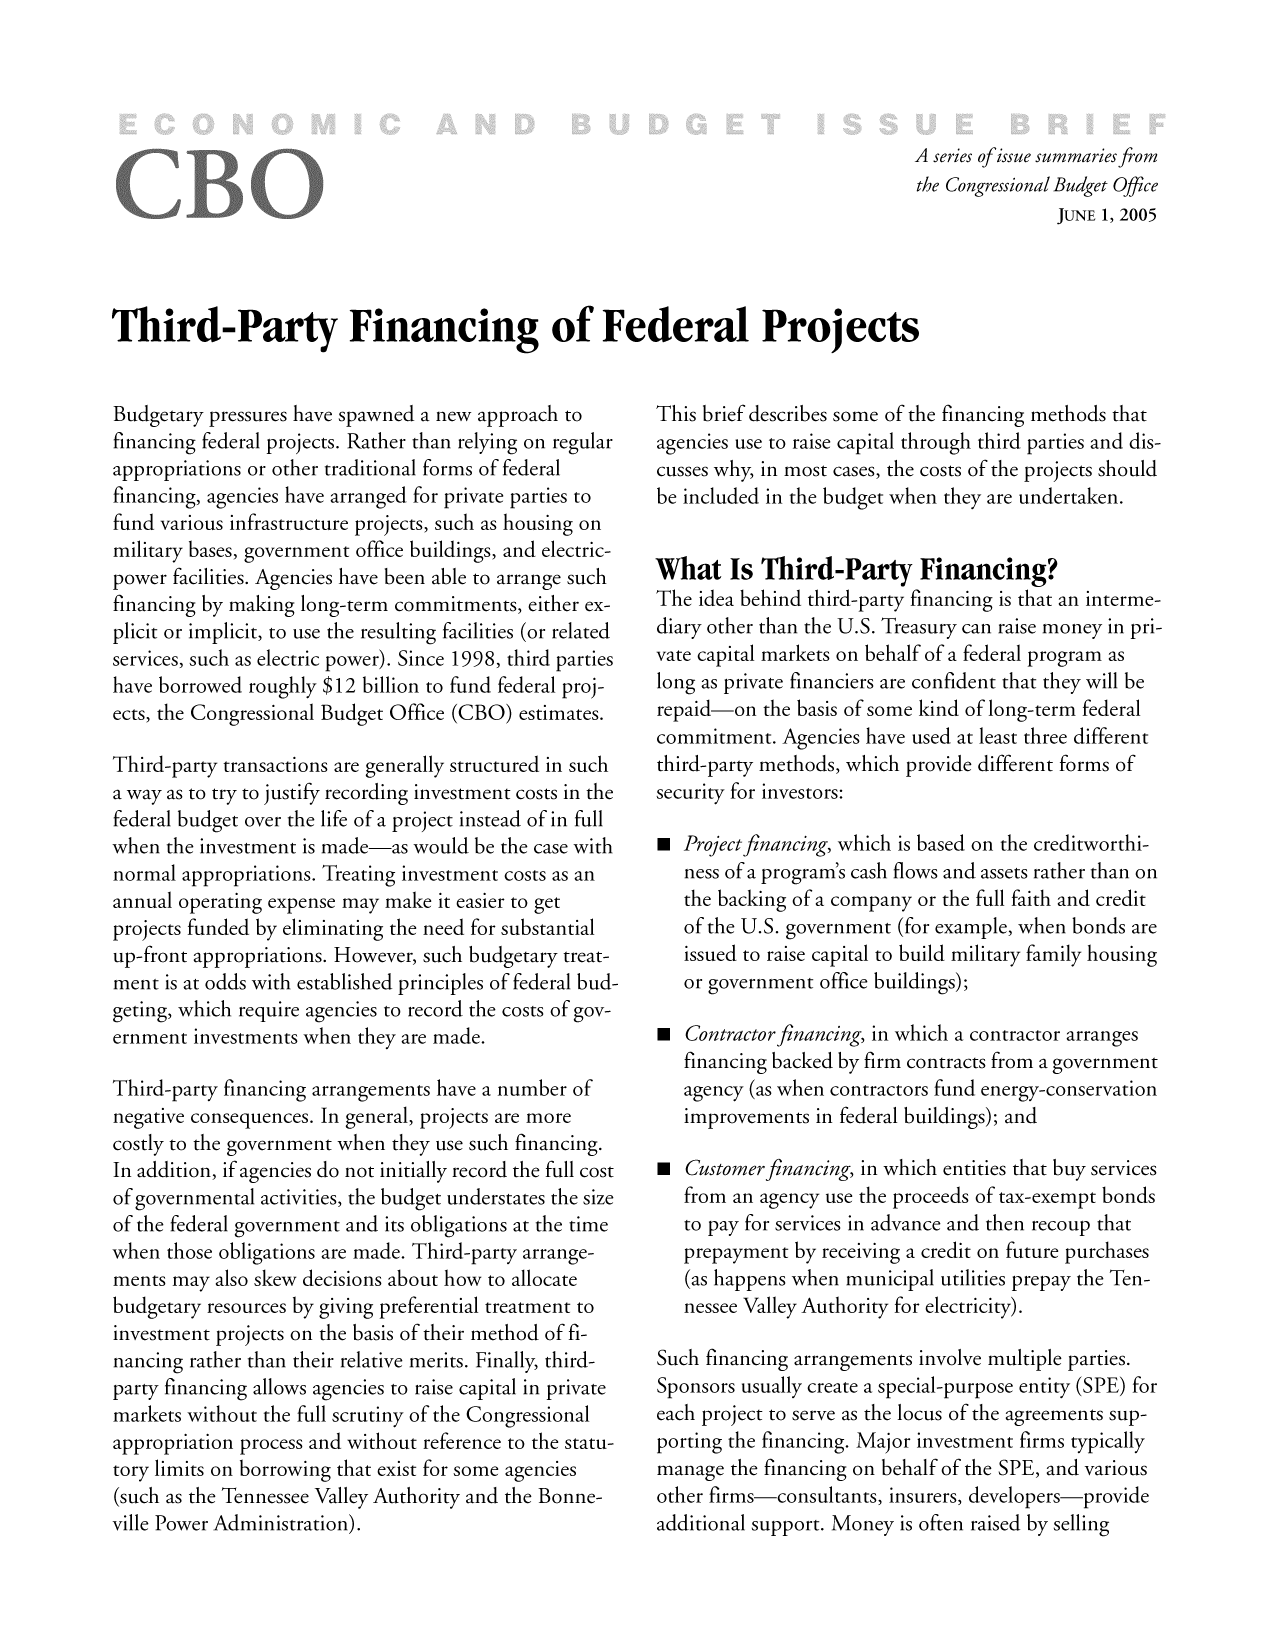 handle is hein.congrec/cbo8325 and id is 1 raw text is: A series of issue summaries from
the Congressional Budget Office
JUNE 1, 2005
Third-Party Financing of Federal Projects

Budgetary pressures have spawned a new approach to
financing federal projects. Rather than relying on regular
appropriations or other traditional forms of federal
financing, agencies have arranged for private parties to
fund various infrastructure projects, such as housing on
military bases, government office buildings, and electric-
power facilities. Agencies have been able to arrange such
financing by making long-term commitments, either ex-
plicit or implicit, to use the resulting facilities (or related
services, such as electric power). Since 1998, third parties
have borrowed roughly $12 billion to fund federal proj-
ects, the Congressional Budget Office (CBO) estimates.
Third-party transactions are generally structured in such
a way as to try to justify recording investment costs in the
federal budget over the life of a project instead of in full
when the investment is made-as would be the case with
normal appropriations. Treating investment costs as an
annual operating expense may make it easier to get
projects funded by eliminating the need for substantial
up-front appropriations. However, such budgetary treat-
ment is at odds with established principles of federal bud-
geting, which require agencies to record the costs of gov-
ernment investments when they are made.
Third-party financing arrangements have a number of
negative consequences. In general, projects are more
costly to the government when they use such financing.
In addition, if agencies do not initially record the full cost
of governmental activities, the budget understates the size
of the federal government and its obligations at the time
when those obligations are made. Third-party arrange-
ments may also skew decisions about how to allocate
budgetary resources by giving preferential treatment to
investment projects on the basis of their method of fi-
nancing rather than their relative merits. Finally, third-
party financing allows agencies to raise capital in private
markets without the full scrutiny of the Congressional
appropriation process and without reference to the statu-
tory limits on borrowing that exist for some agencies
(such as the Tennessee Valley Authority and the Bonne-

This brief describes some of the financing methods that
agencies use to raise capital through third parties and dis-
cusses why, in most cases, the costs of the projects should
be included in the budget when they are undertaken.
What Is Third-Party Financing?
The idea behind third-party financing is that an interme-
diary other than the U.S. Treasury can raise money in pri-
vate capital markets on behalf of a federal program as
long as private financiers are confident that they will be
repaid-on the basis of some kind of long-term federal
commitment. Agencies have used at least three different
third-party methods, which provide different forms of
security for investors:
 Proj.ect financing, which is based on the creditworthi-
ness of a program's cash flows and assets rather than on
the backing of a company or the full faith and credit
of the U.S. government (for example, when bonds are
issued to raise capital to build military family housing
or government office buildings);
 Contractor financing, in which a contractor arranges
financing backed by firm contracts from a government
agency (as when contractors fund energy-conservation
improvements in federal buildings); and
 Custom er financing, in which entities that buy services
from an agency use the proceeds of tax-exempt bonds
to pay for services in advance and then recoup that
prepayment by receiving a credit on future purchases
(as happens when municipal utilities prepay the Ten-
nessee Valley Authority for electricity).
Such financing arrangements involve multiple parties.
Sponsors usually create a special-purpose entity (SPE) for
each project to serve as the locus of the agreements sup-
porting the financing. Major investment firms typically
manage the financing on behalf of the SPE, and various
other firms-consultants, insurers, develop ers-p rovide


